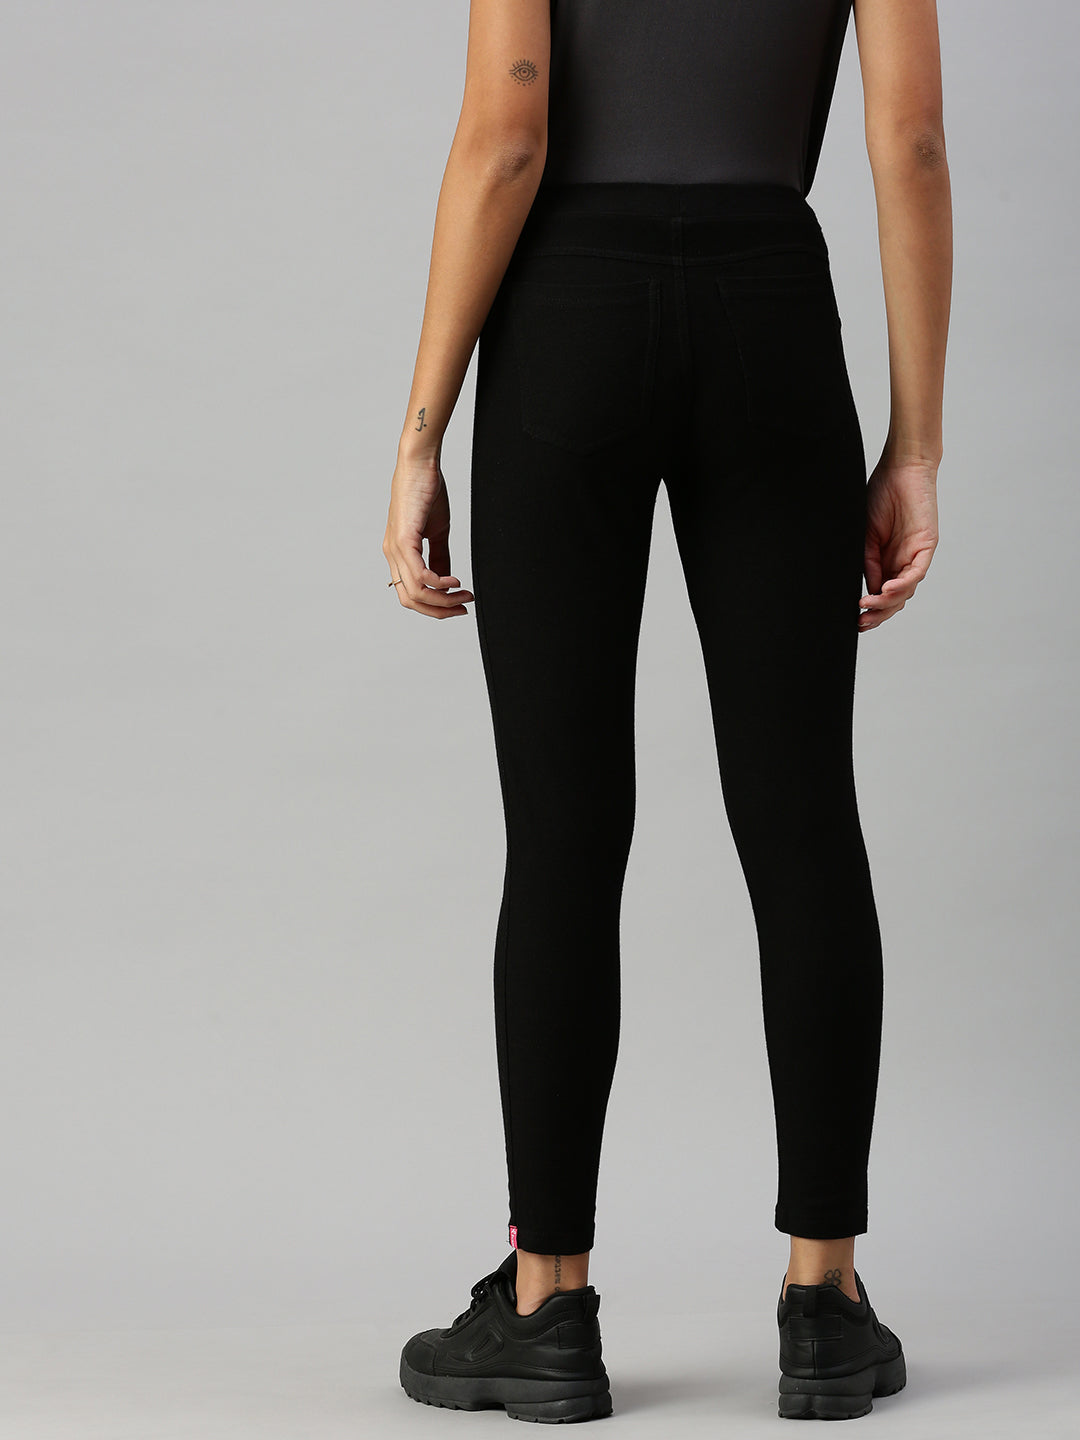 Wear Prisma's skin fitting jeggings on your favourite top. These are both  comfortable and stylish. #BrandPrisma …